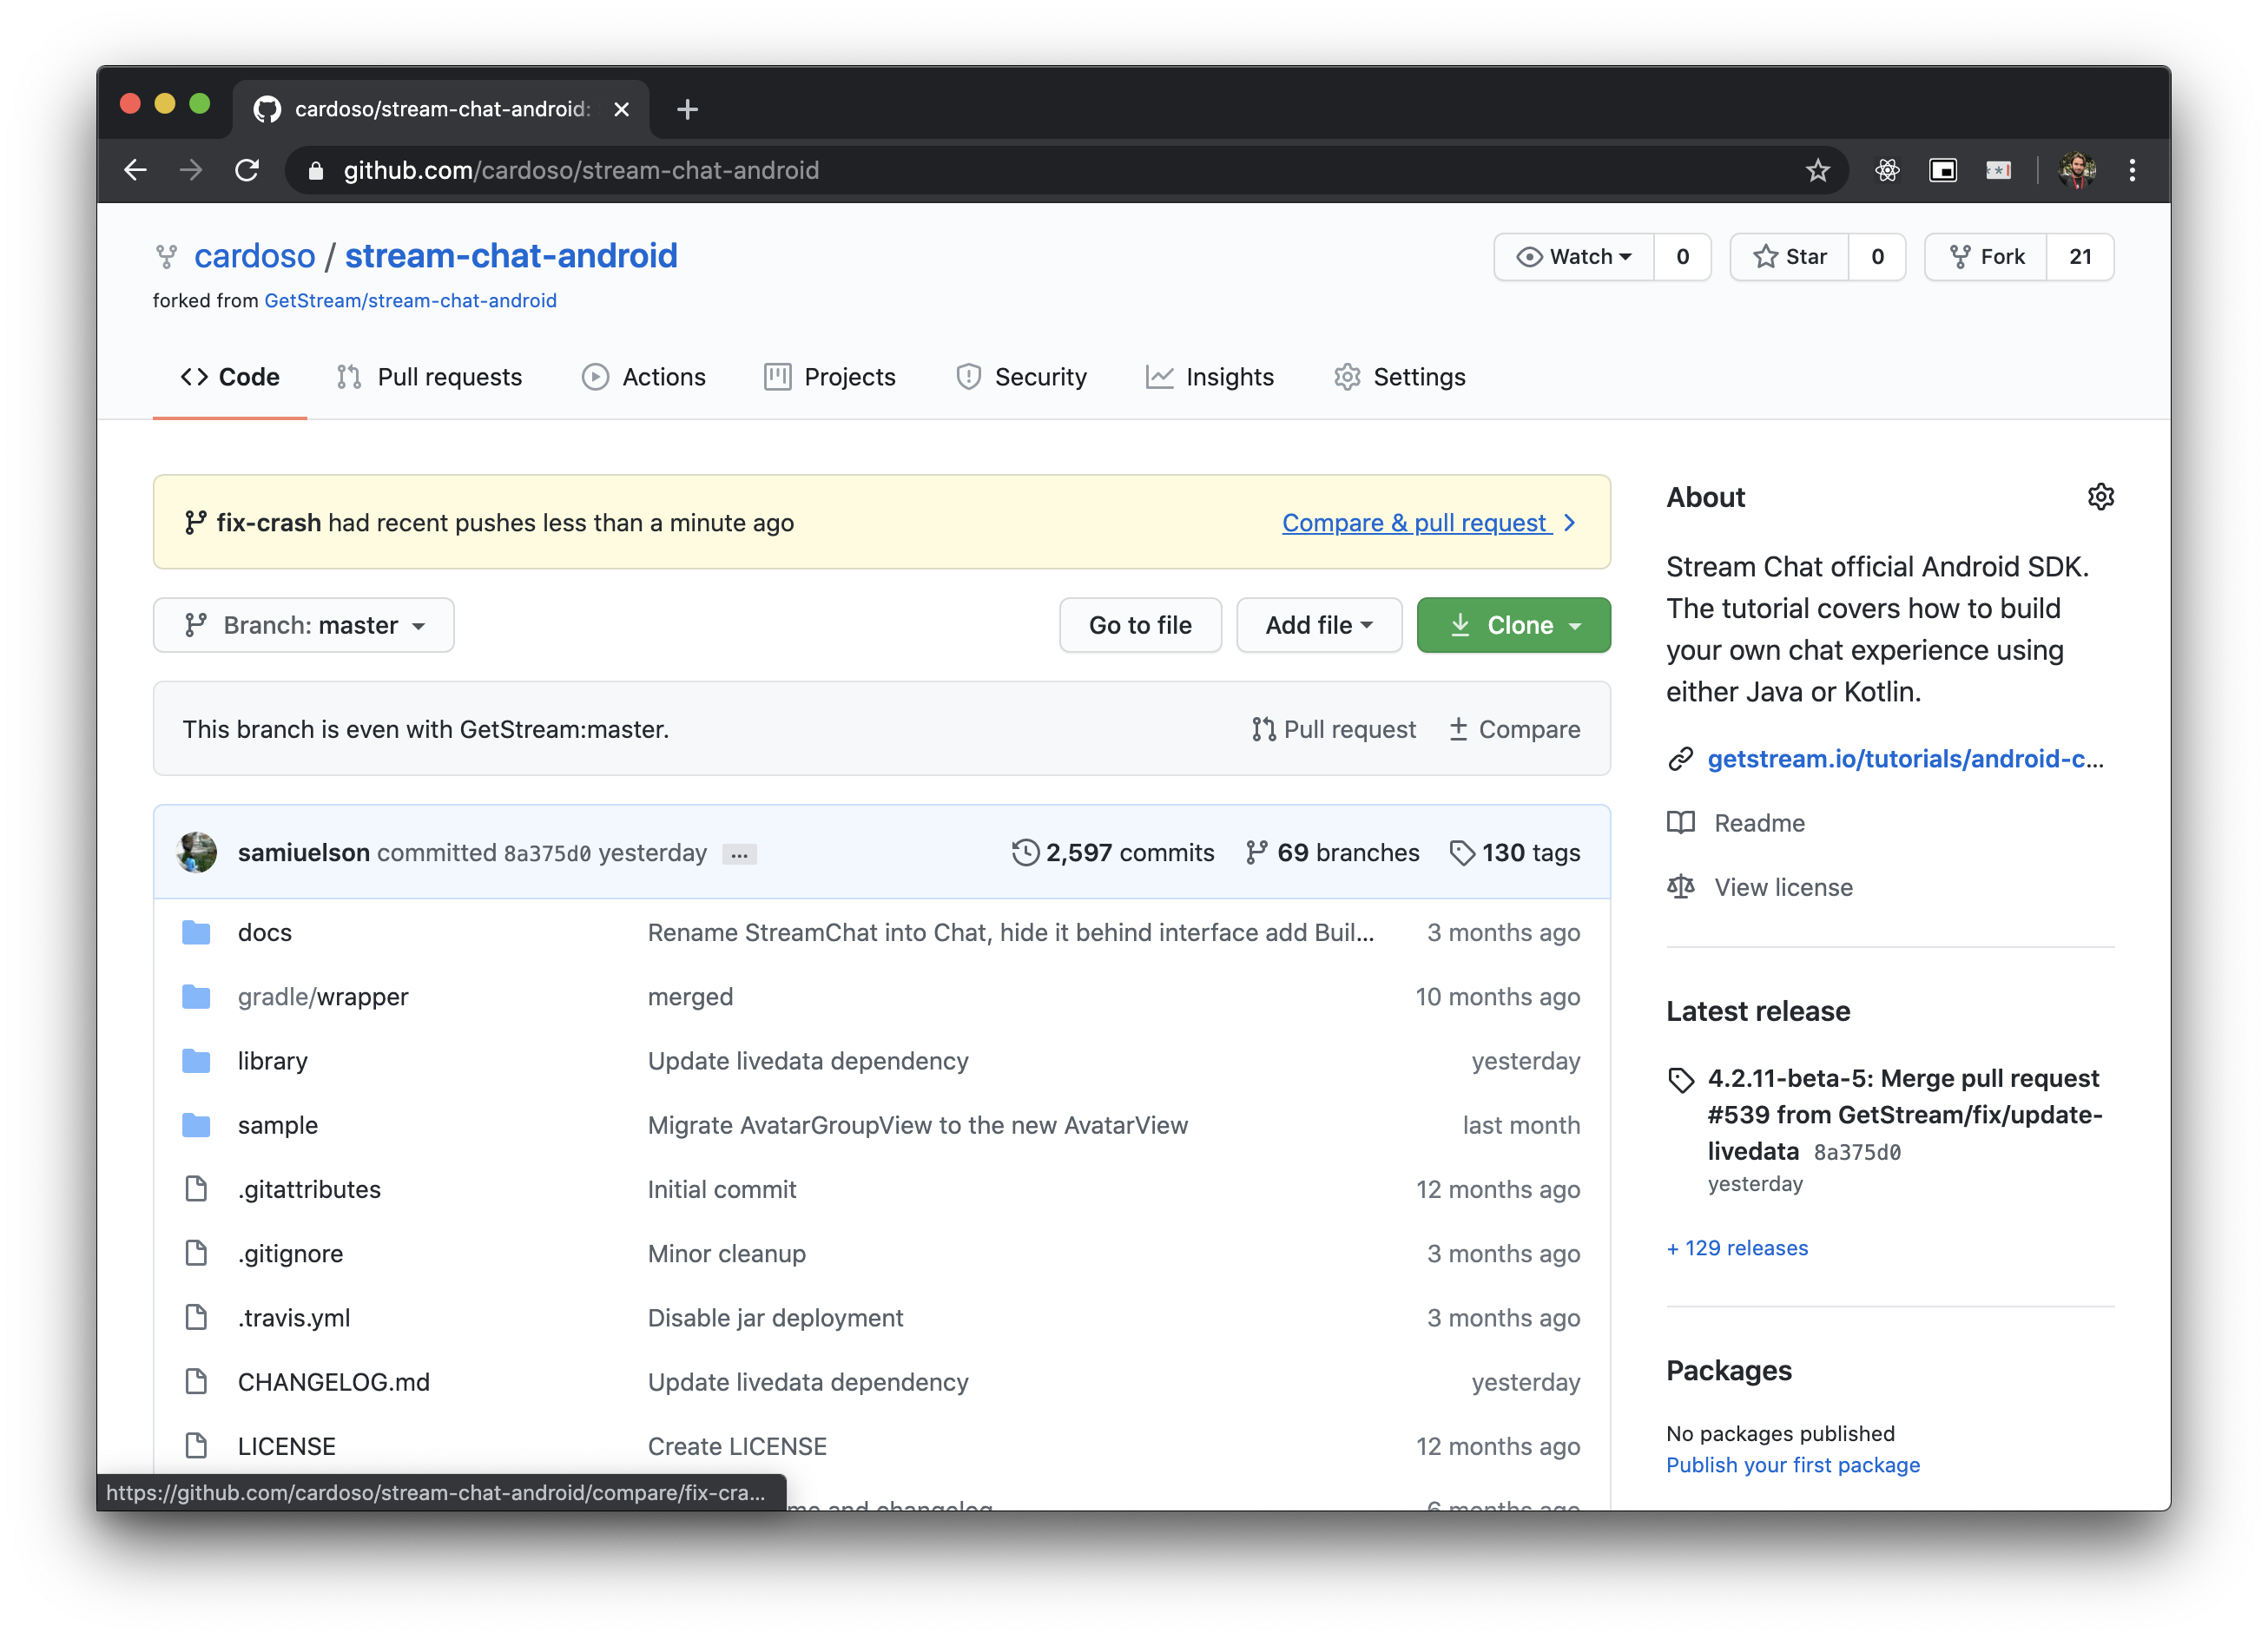 Image shows GitHub repo page with a prompt to open a Pull Request with newly pushed branch